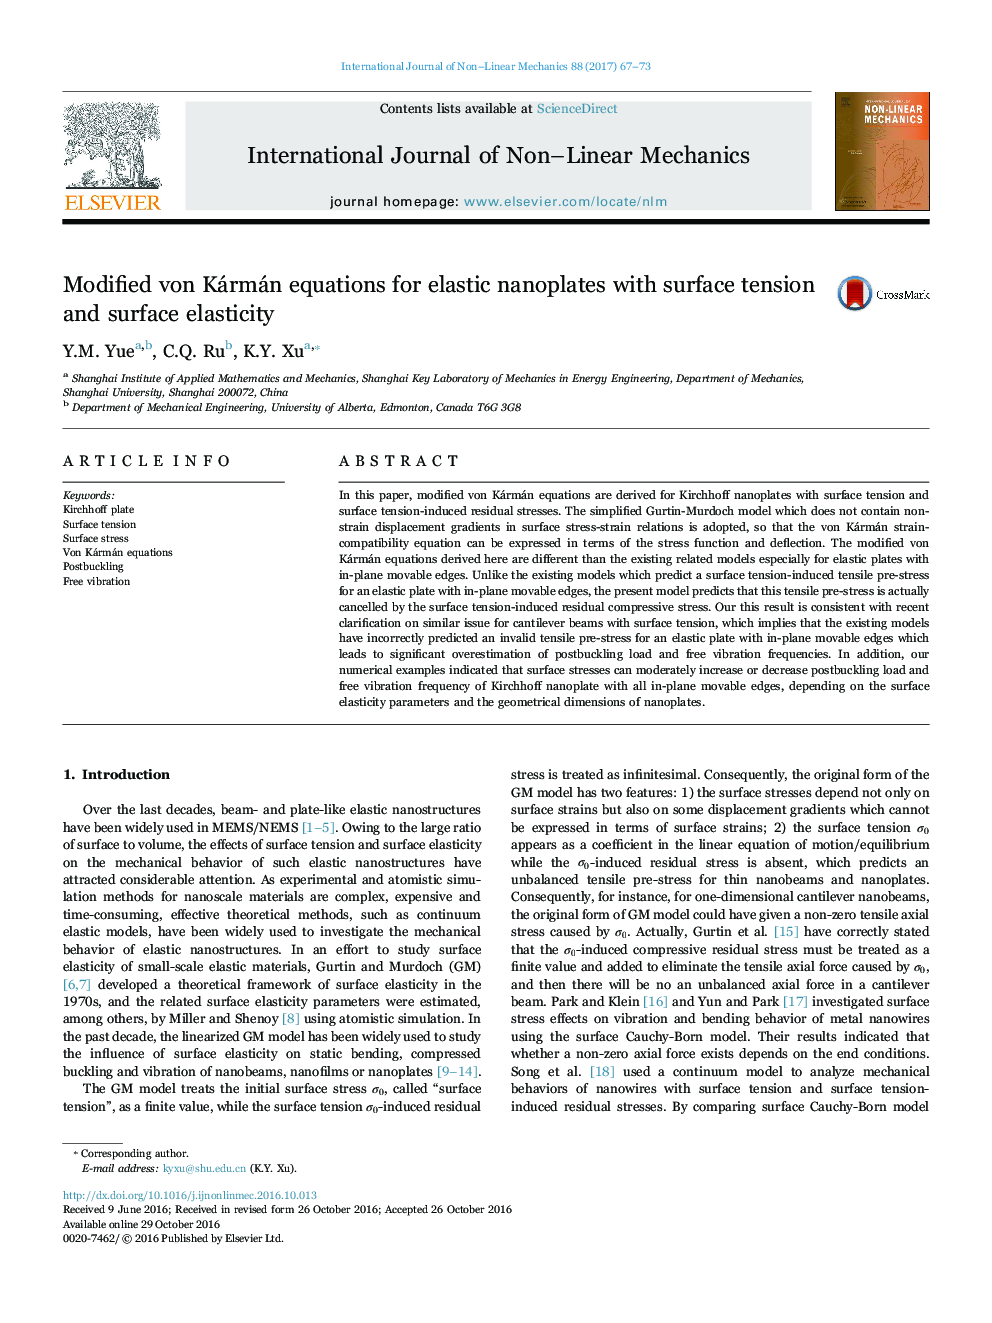 Modified von Kármán equations for elastic nanoplates with surface tension and surface elasticity